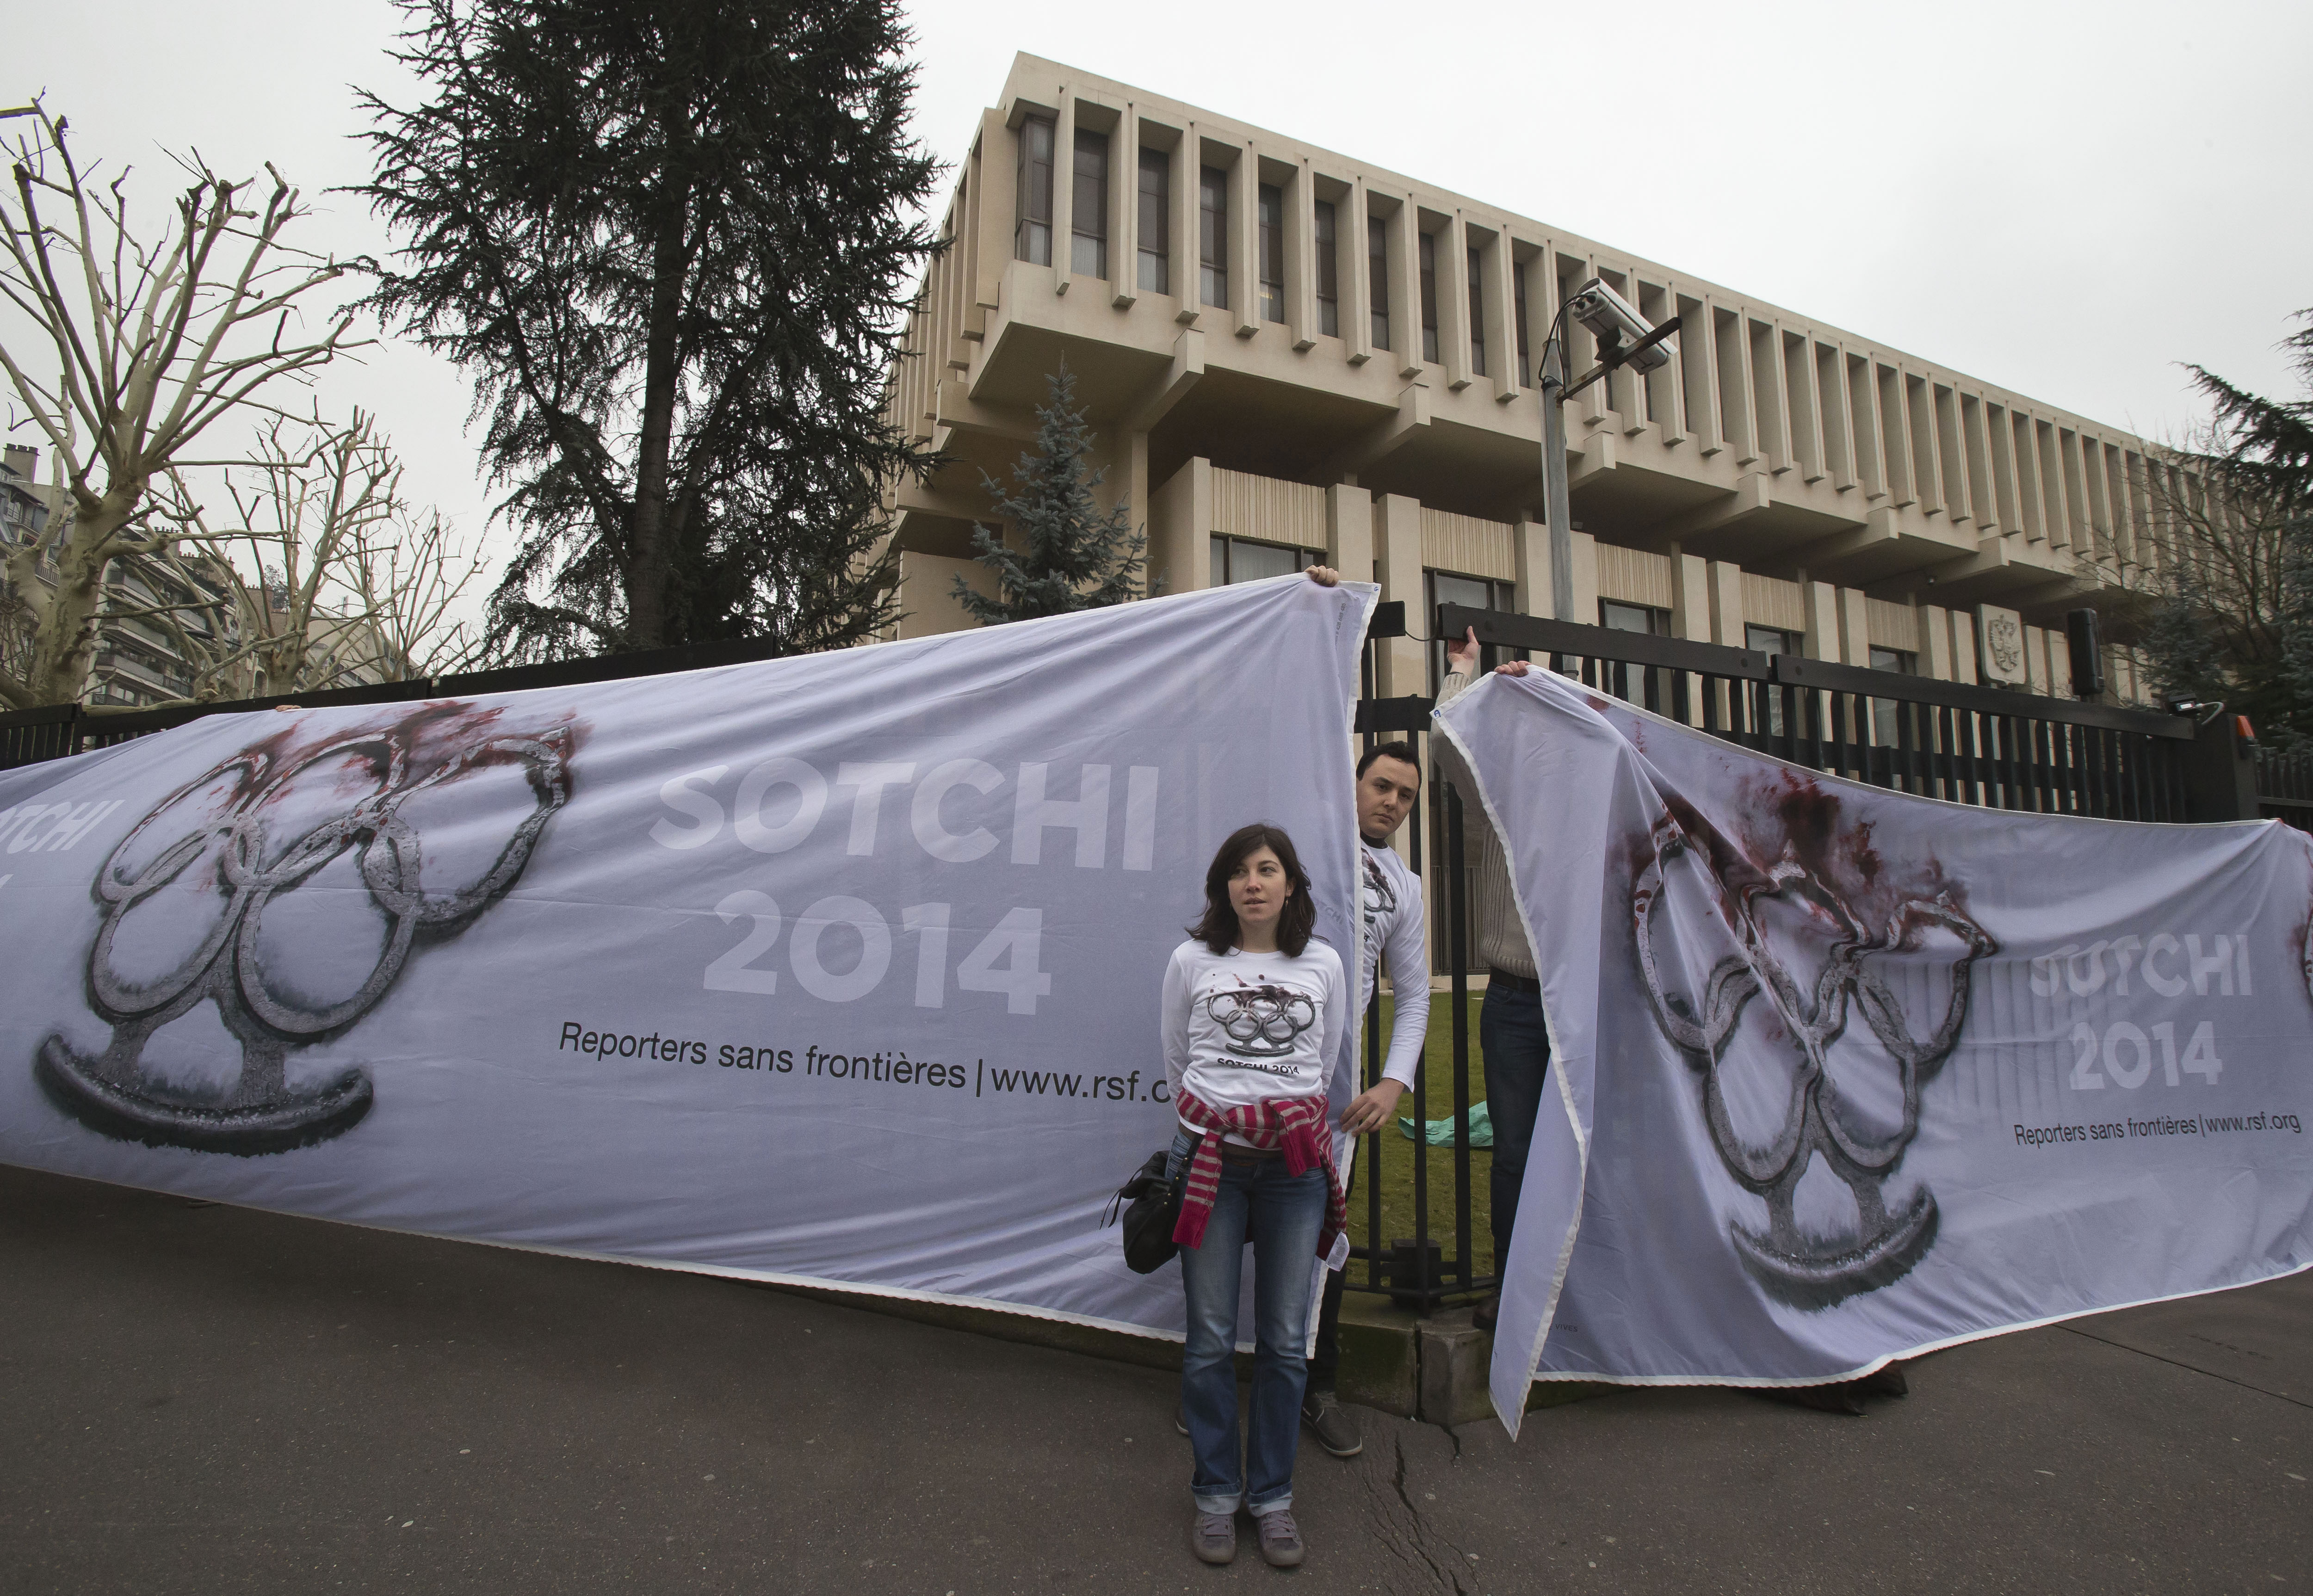 1 March 2013, France. Activists with Reporters Without Borders (RSF) stand outside of the Russian embassy in Paris in front of banners featuring blood-covered brass knuckles in the design of the Olympic rings.